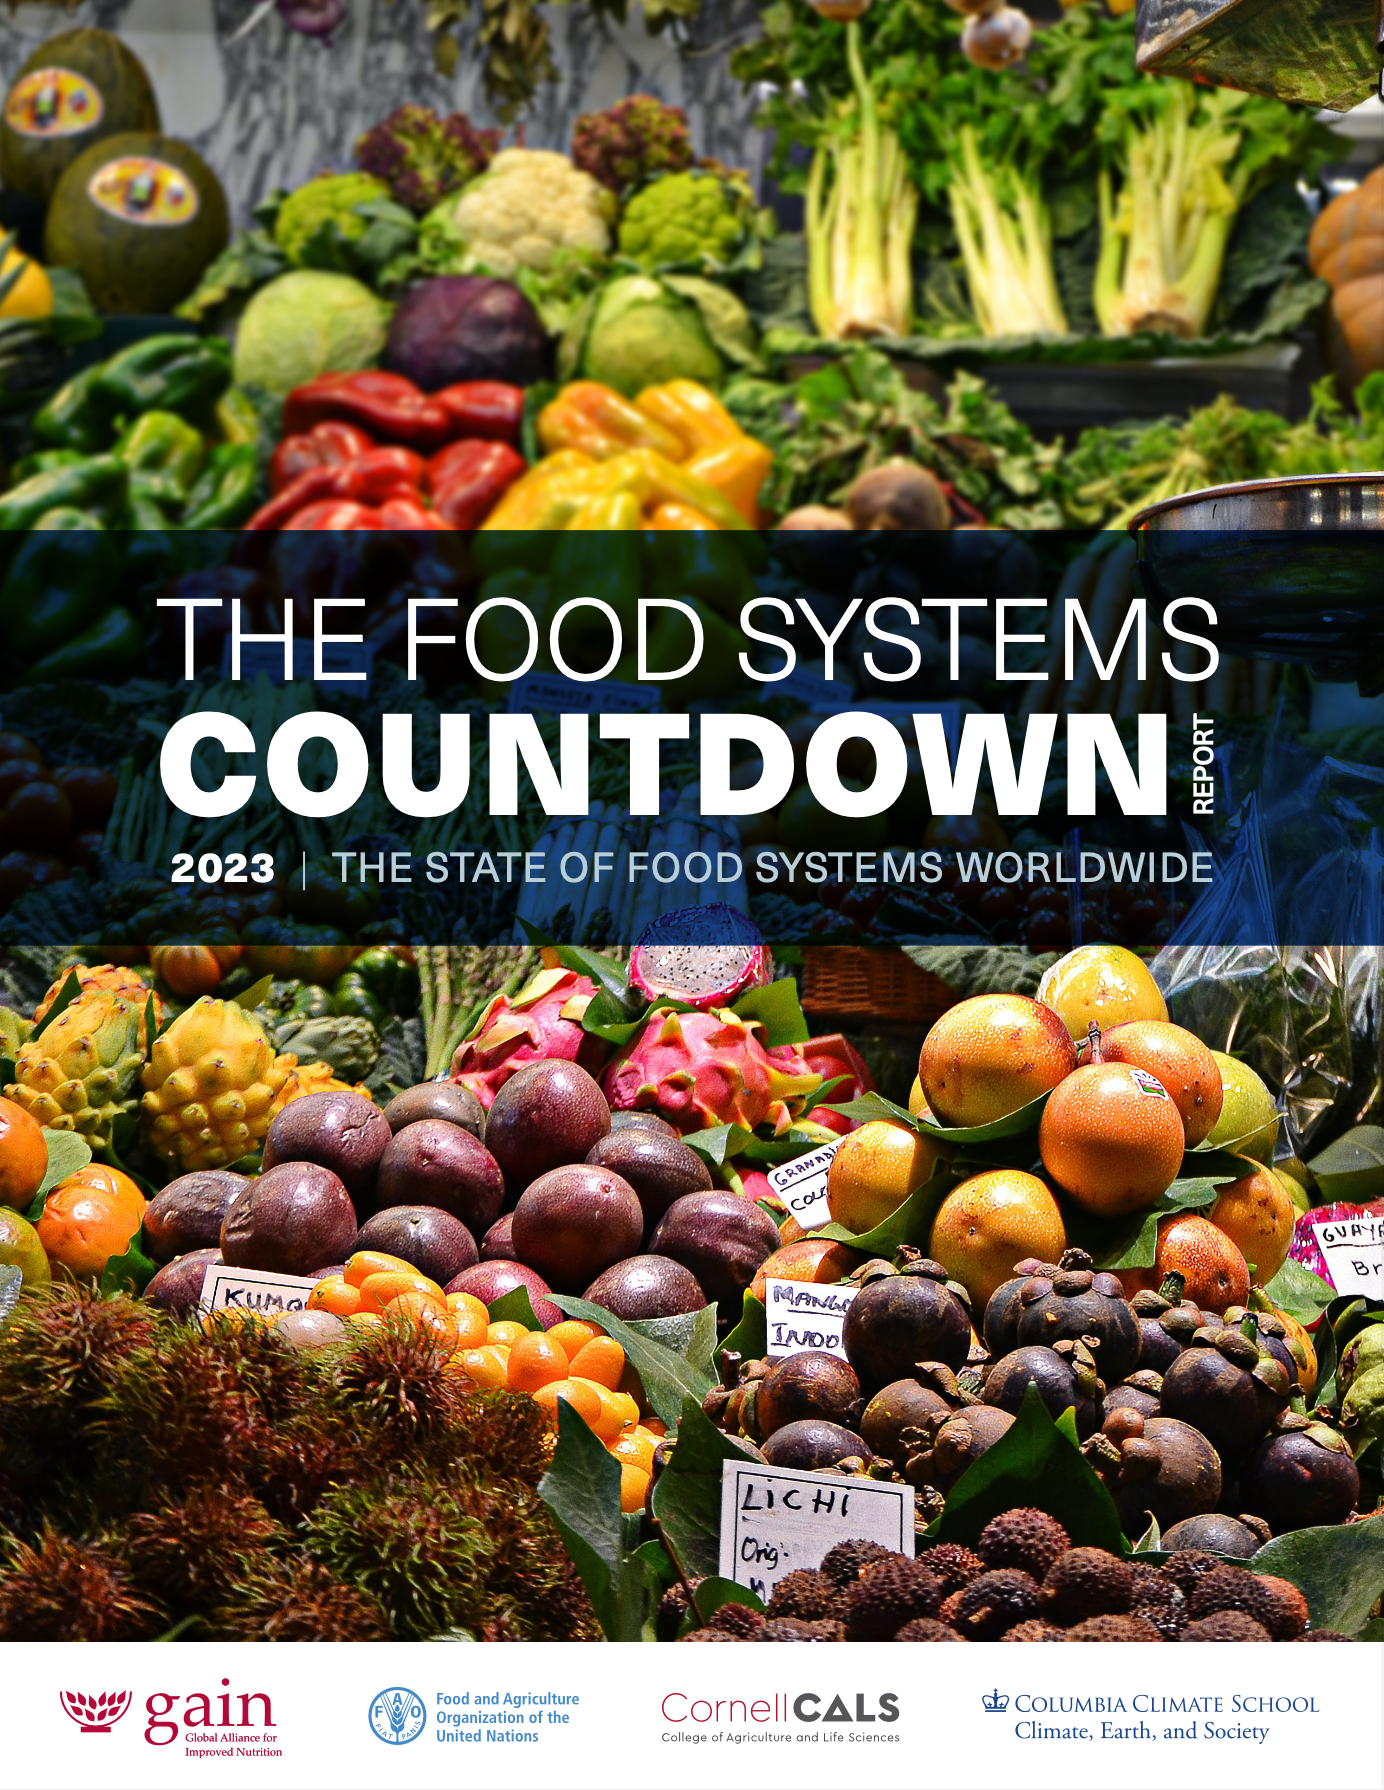 The Food Systems Countdown Report 2023: The State of Food Systems Worldwide